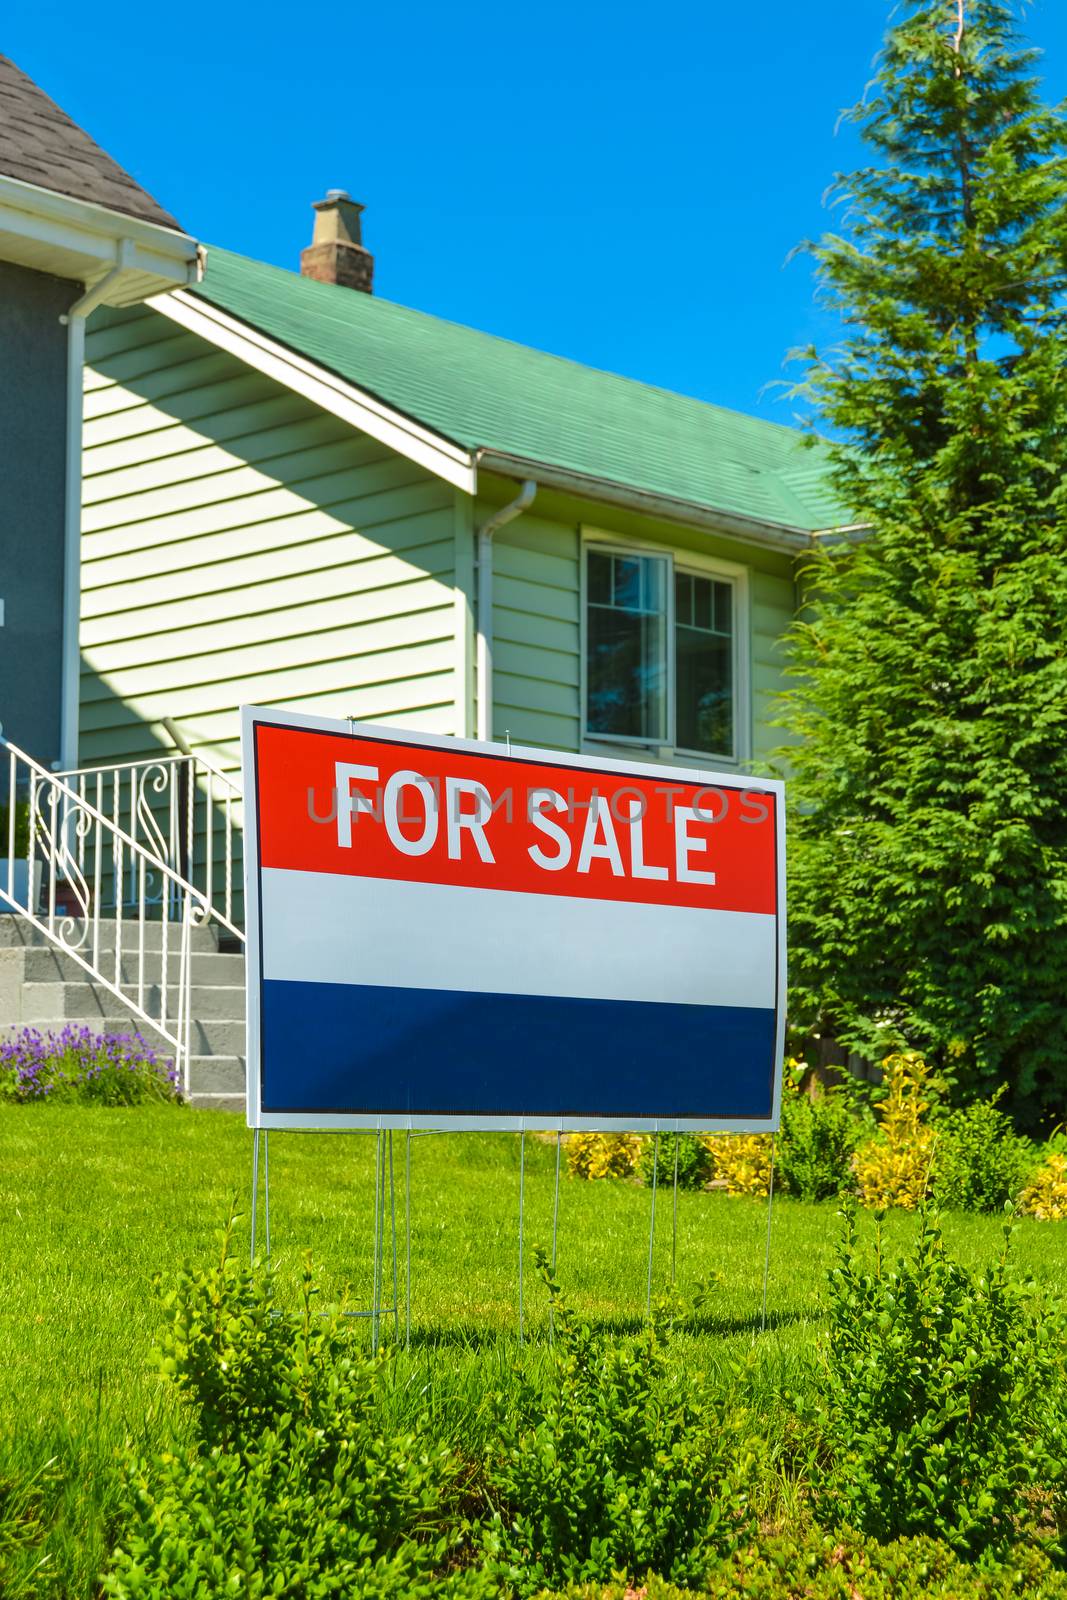 Real estate sign 'For Sale' on front yard of a house.